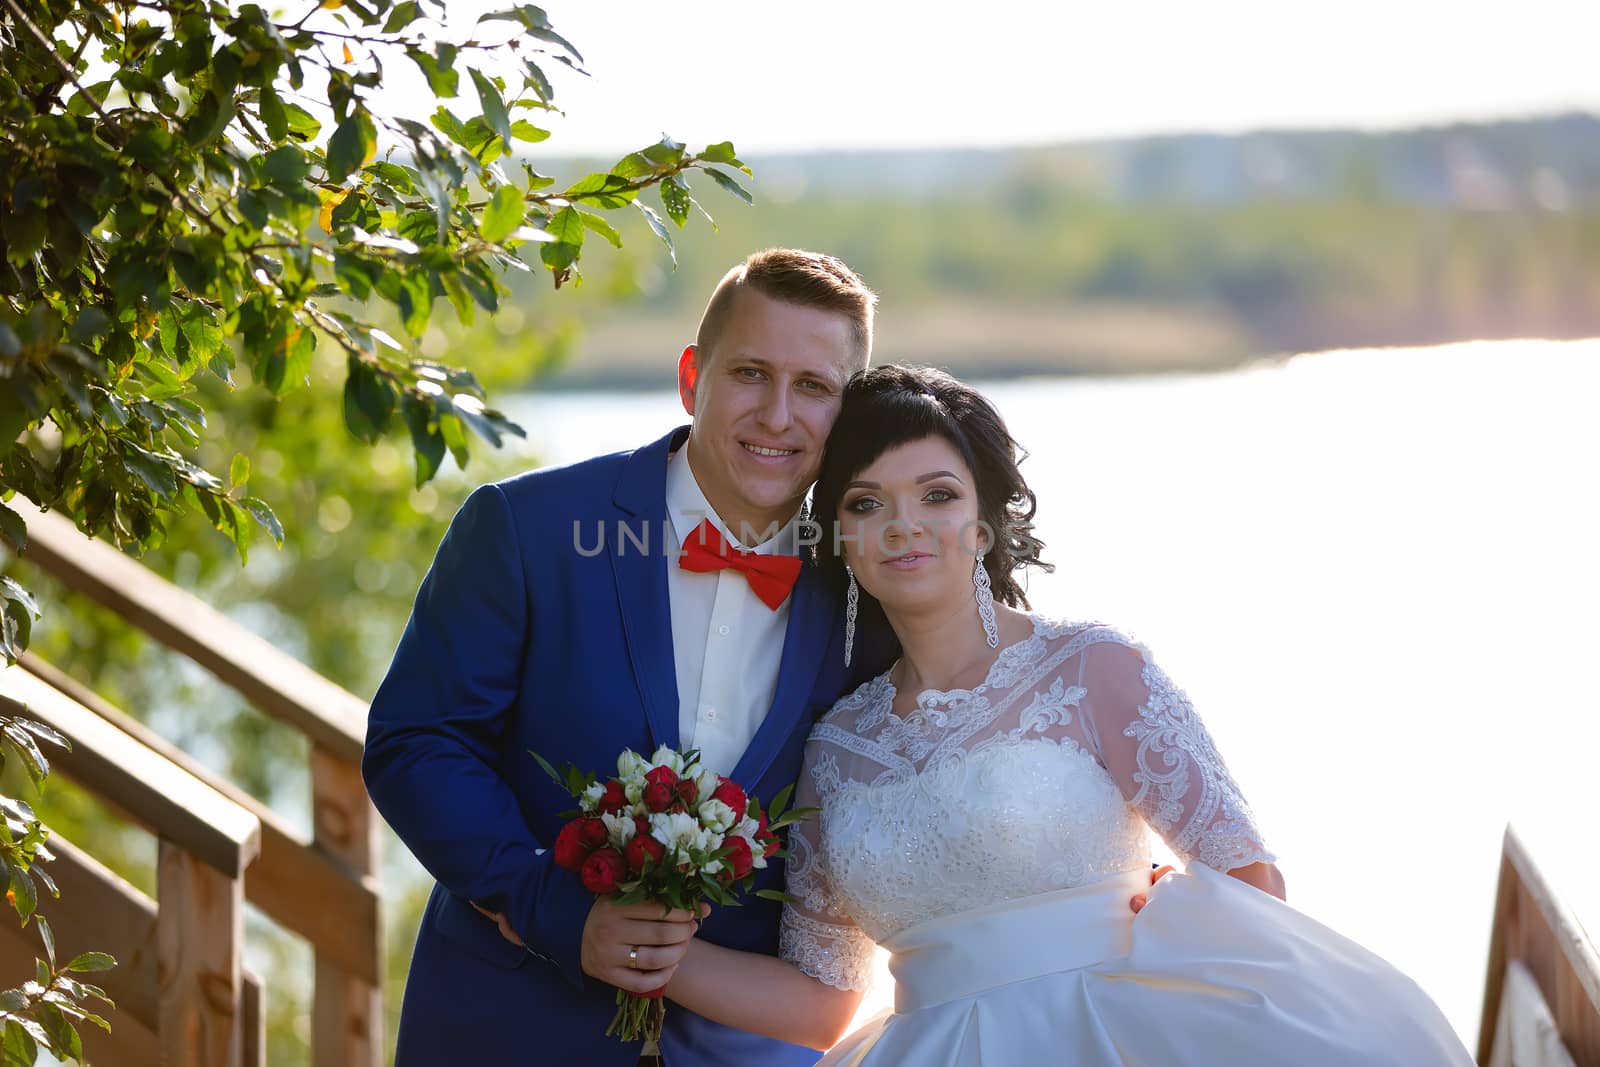 Portrait of the bride and groom in nature.